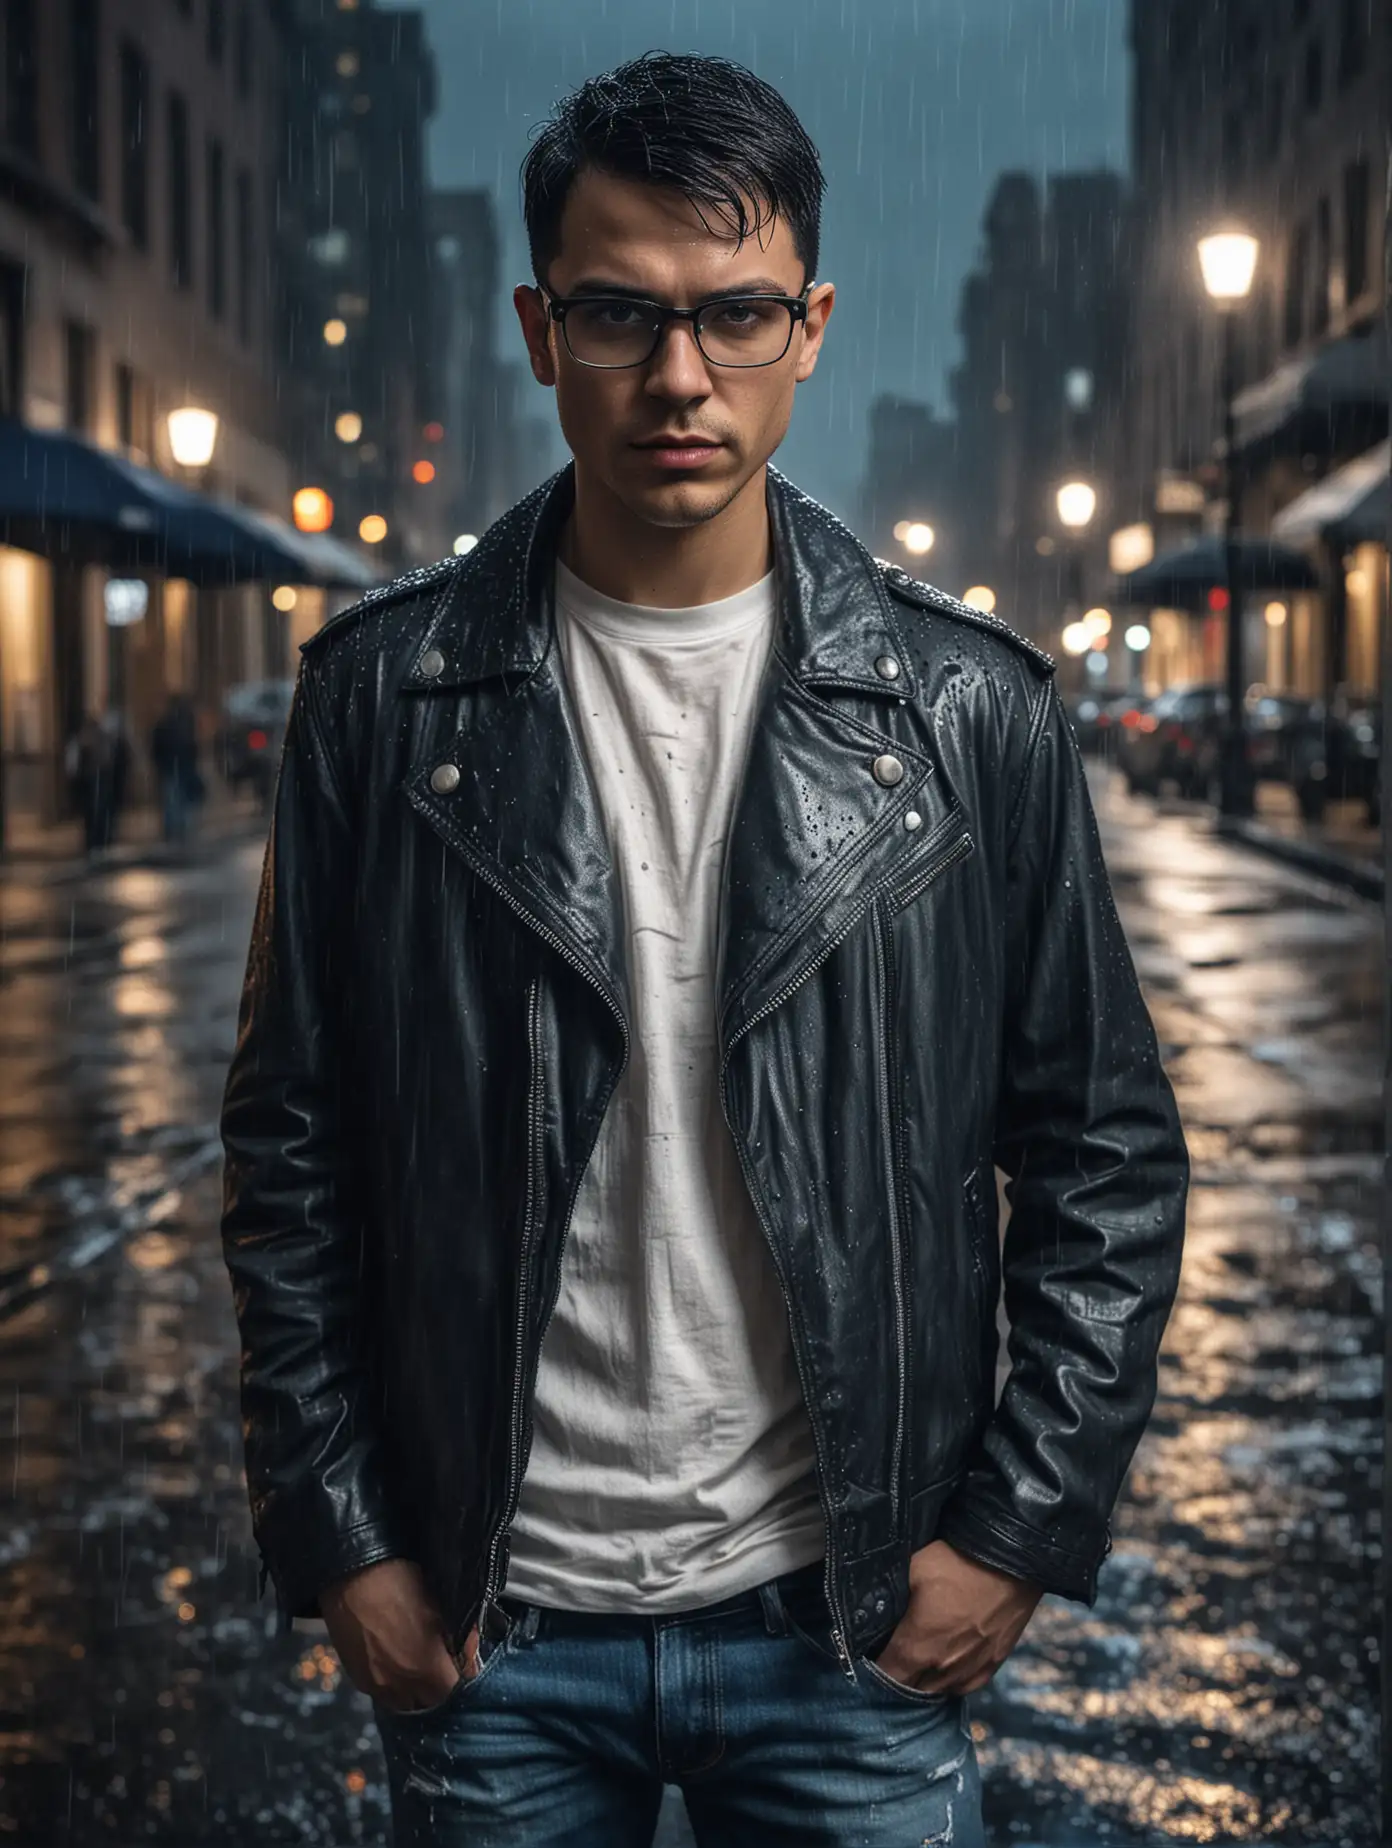 Create a professional portrait-style photograph of a man standing in the rainy streets of Gotham City at night. He should have short black hair with a buzz cut, wearing a leather jacket, a white t-shirt, and blue jeans. The man wears white clear glasses, exuding a mysterious vibe in the urban ambiance.